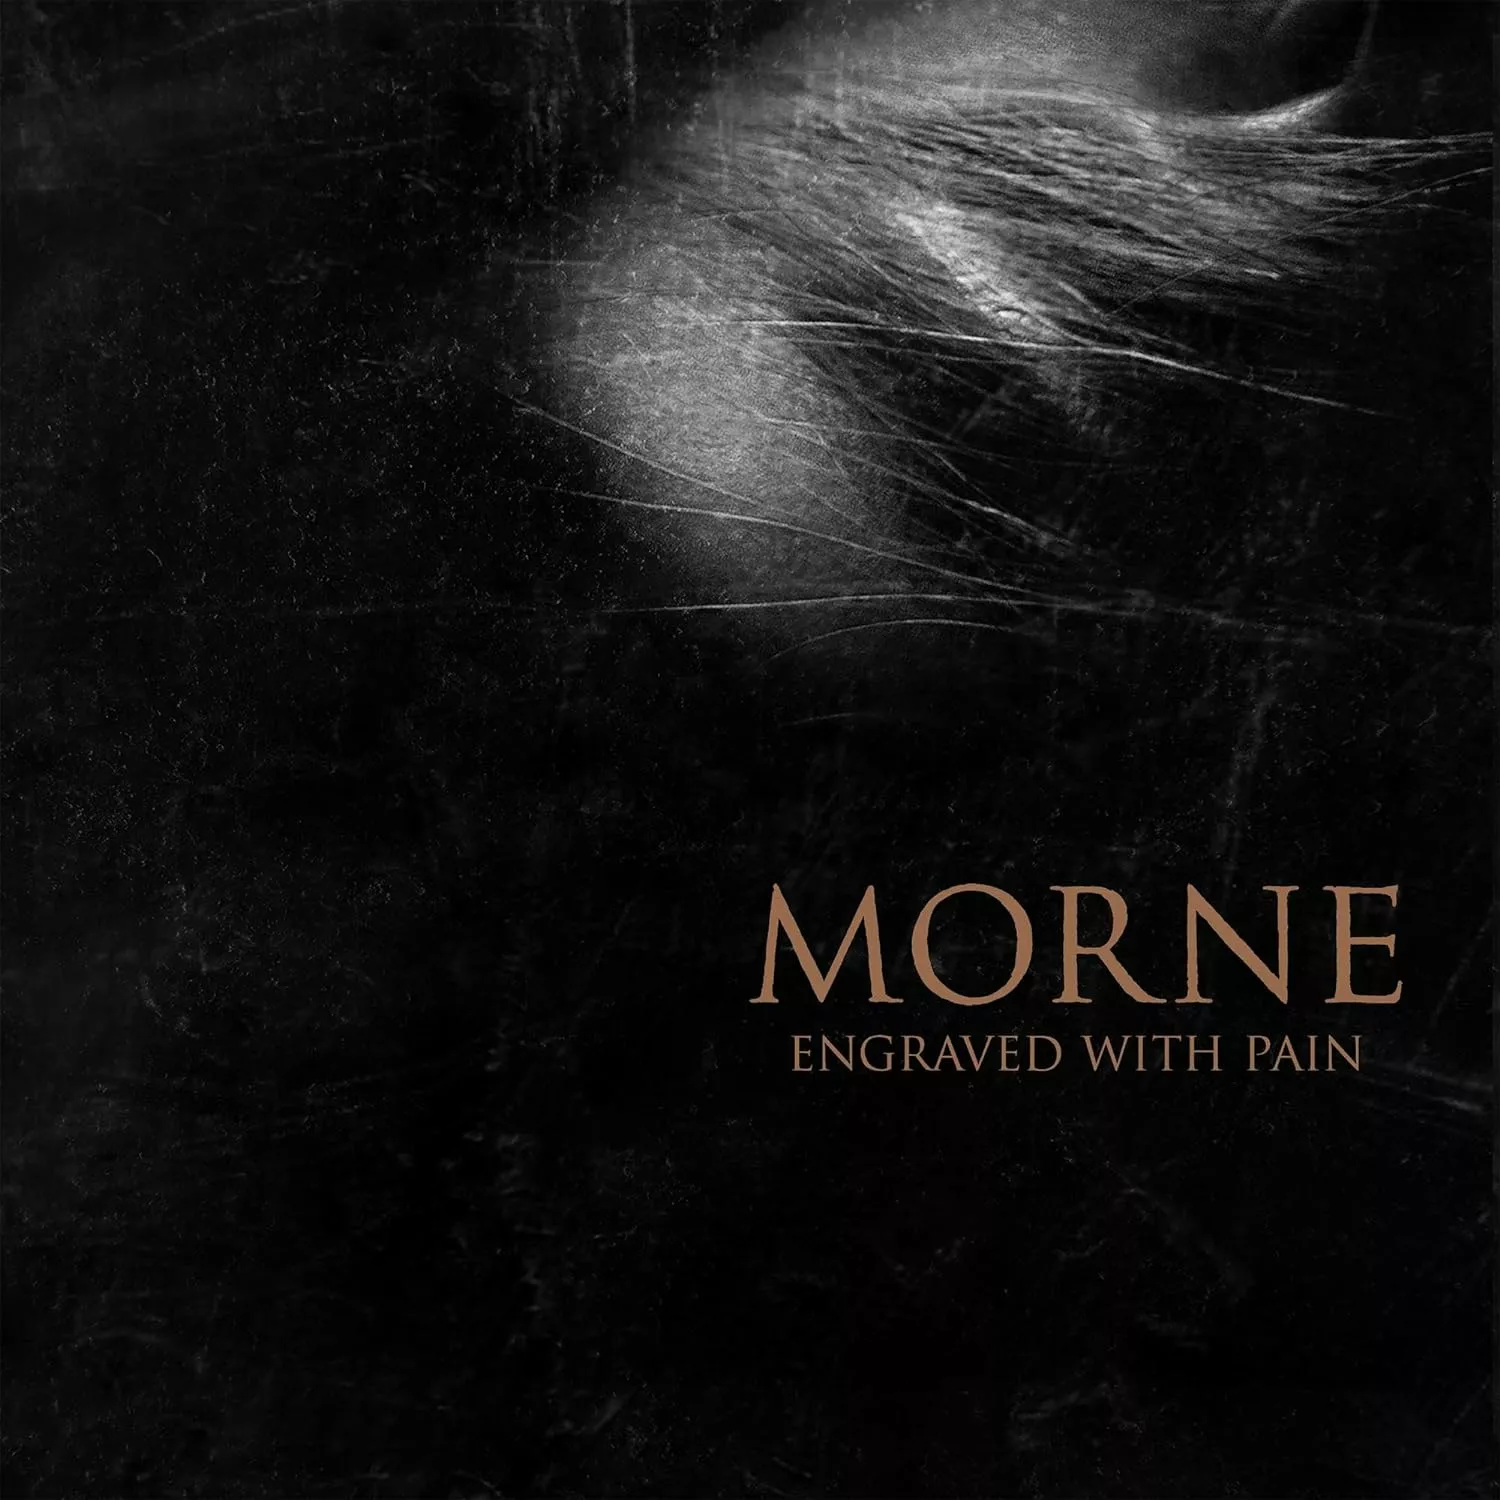 MORNE - Engraved With Pain [DIGIPAK CD]